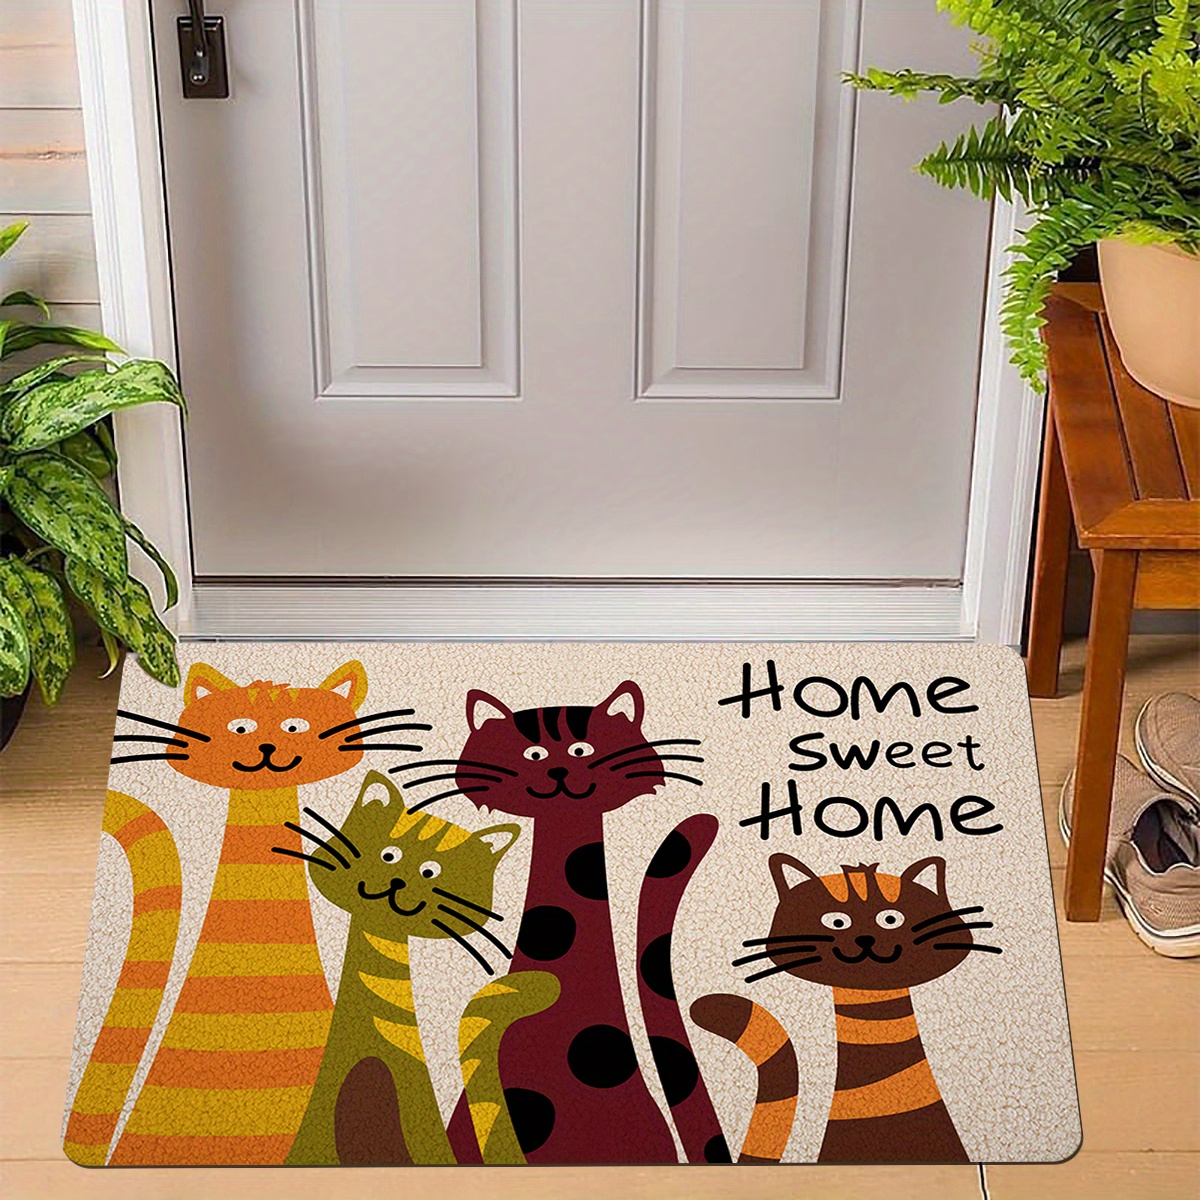 

Welcome Home Colorful Cat Alphabet Entrance Rug - Non-slip, Stain Resistant Polyester Mat With Soft Sponge Backing For Indoor/outdoor Use